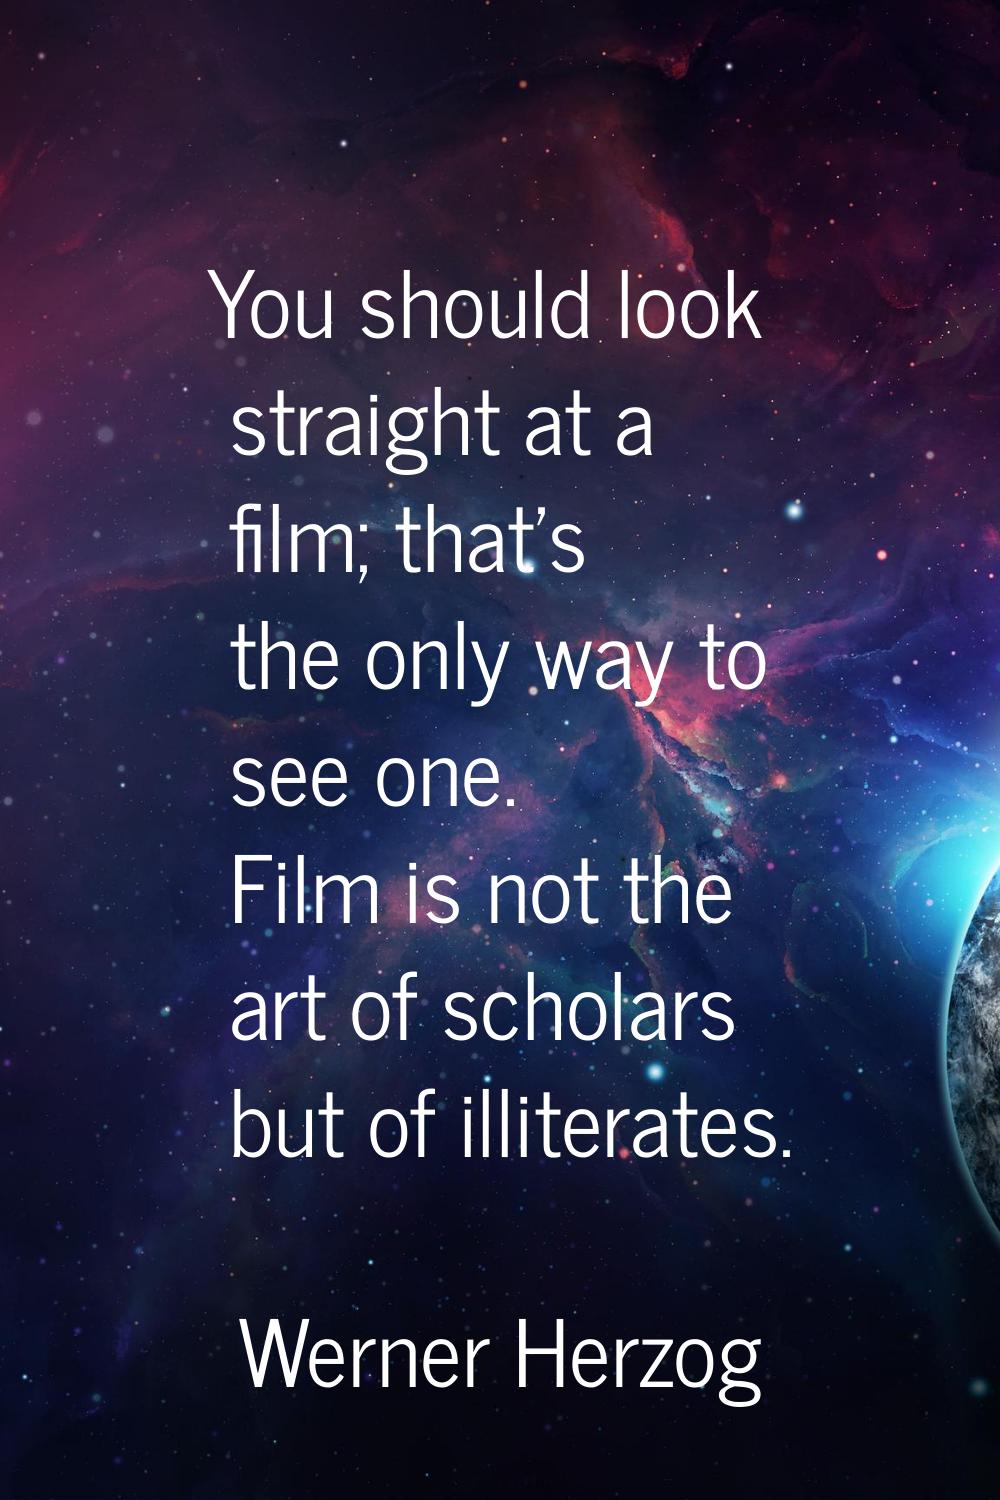 You should look straight at a film; that's the only way to see one. Film is not the art of scholars